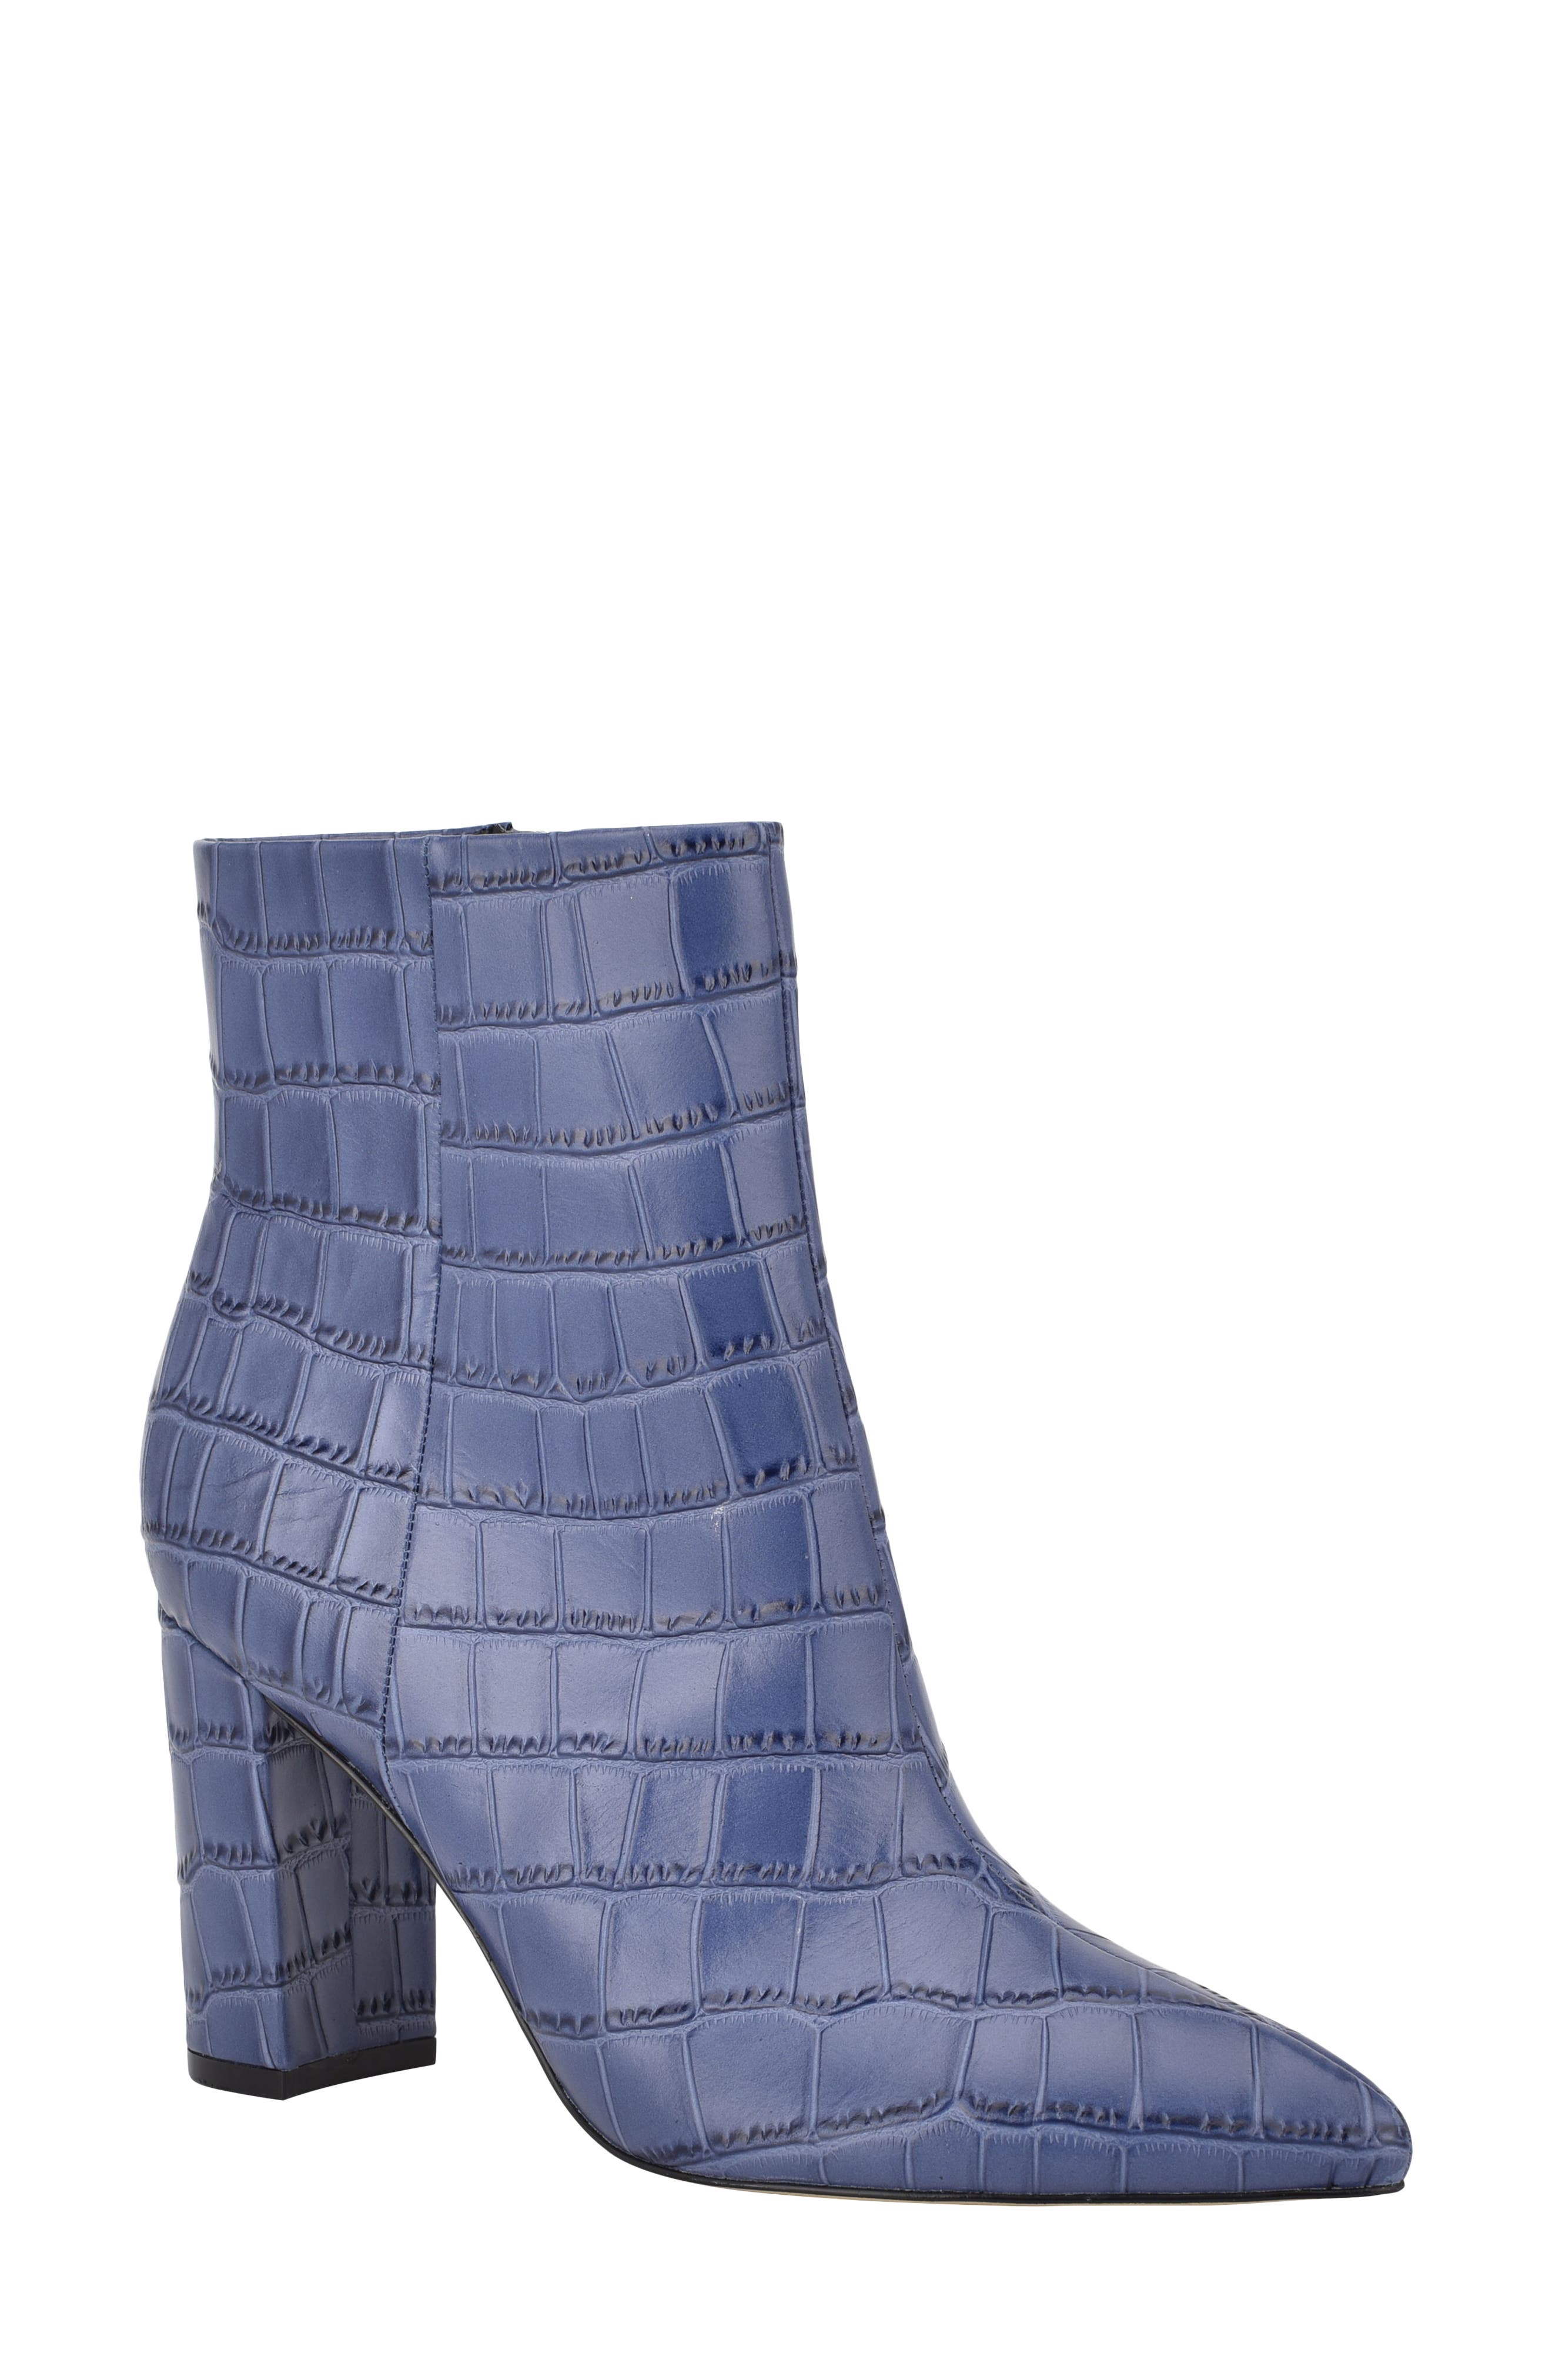 Blue Booties \u0026 Ankle Boots | Nordstrom